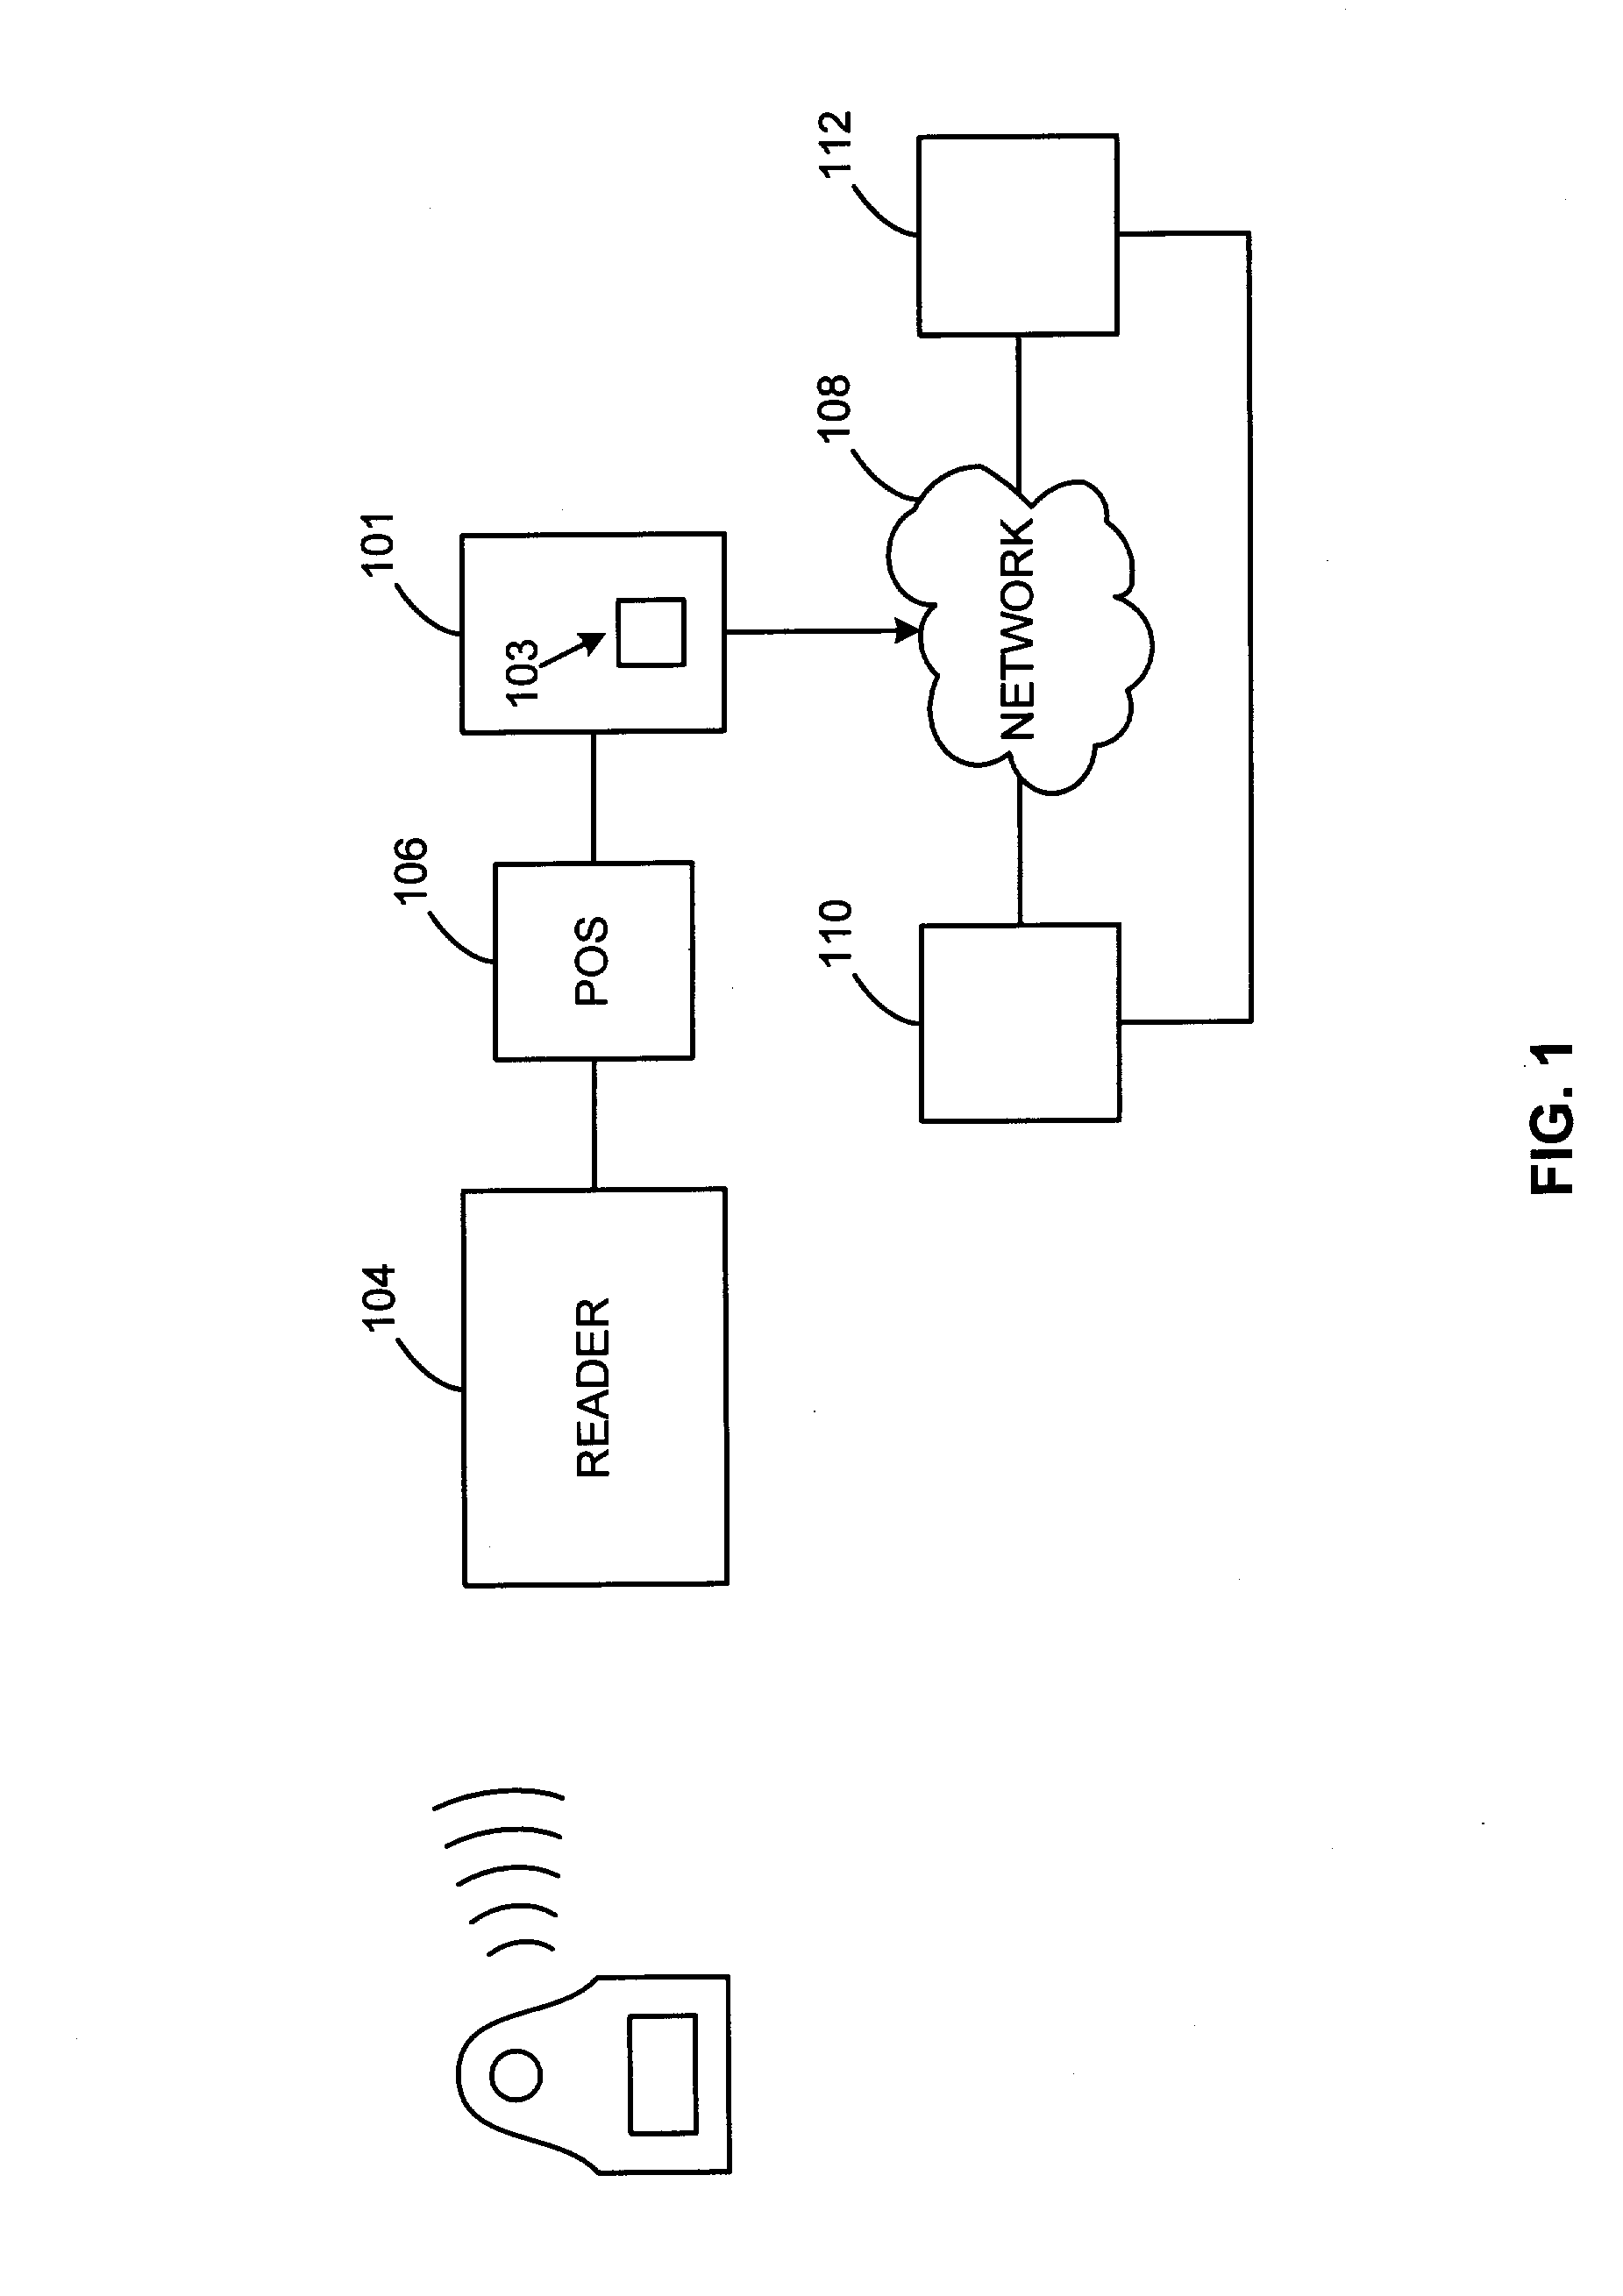 System and method for securing sensitive information during completion of a transaction